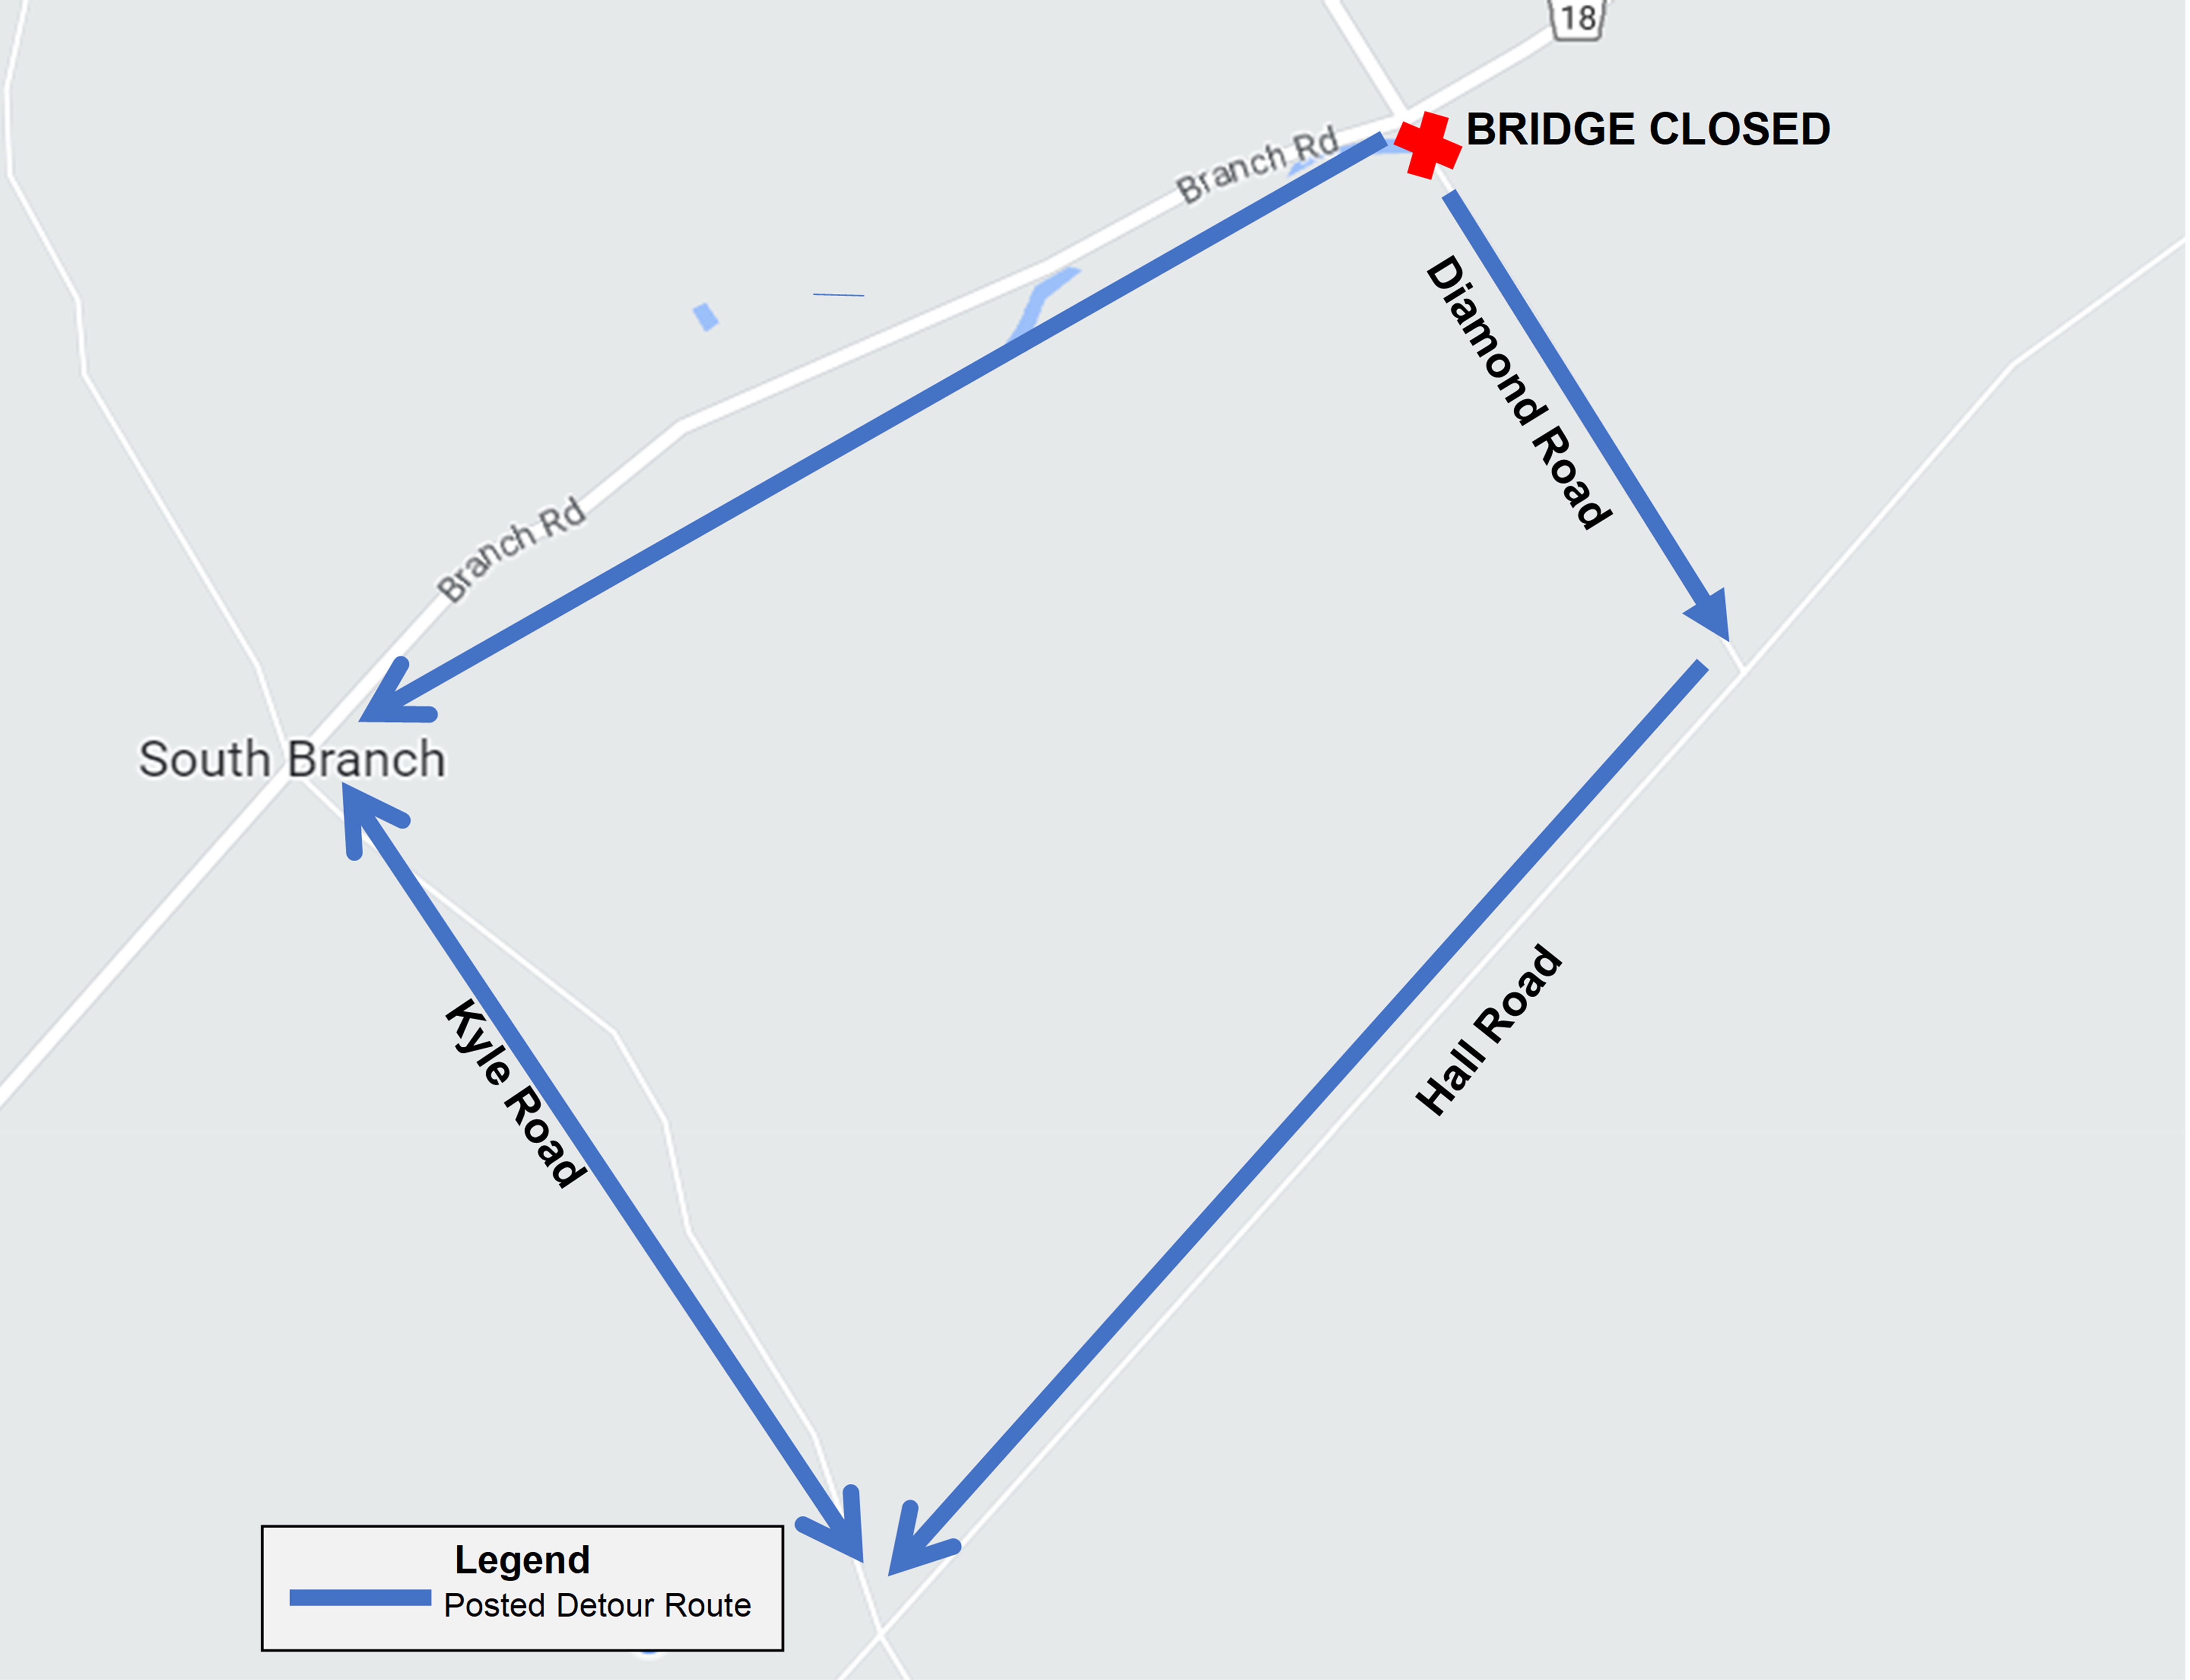 map showing the diamond road closure and the detour route